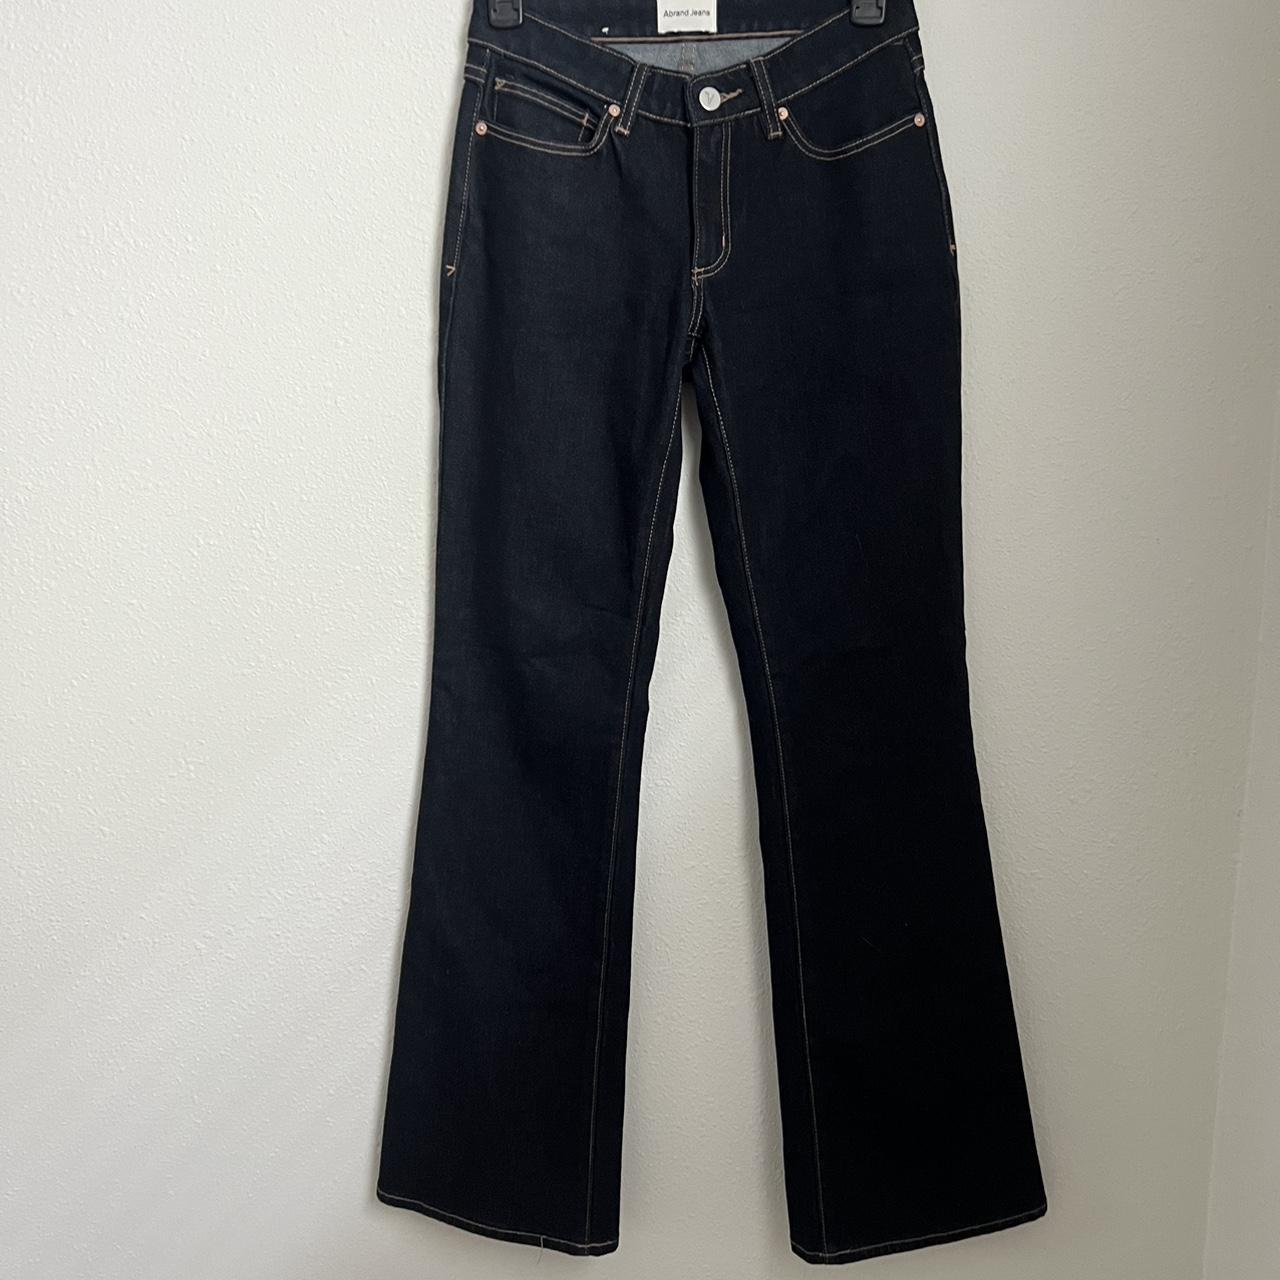 Abrand mid/low rise flare jeans dark wash size 24,... - Depop